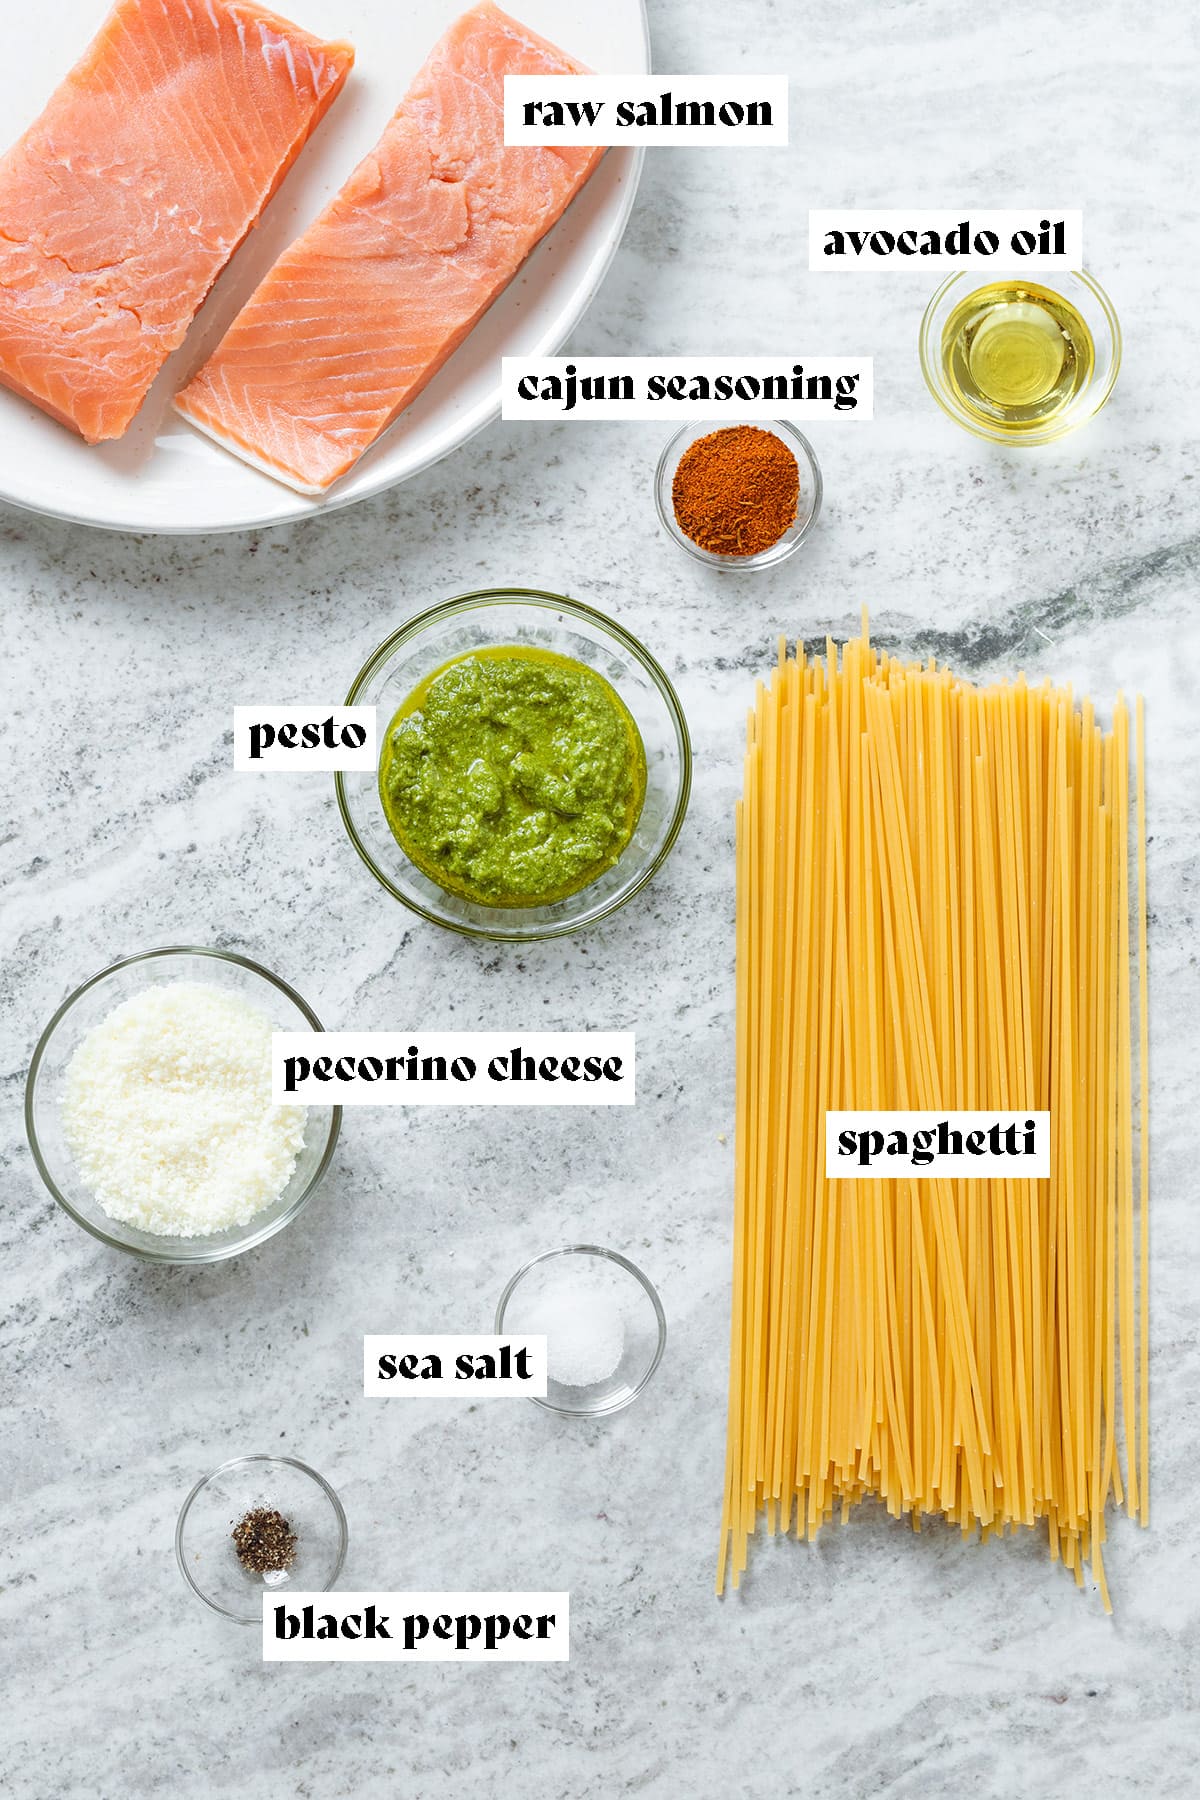 Raw salmon, spaghetti, pesto, pecorino cheese, and spices all measured and laid out on a grey background with text overlay.